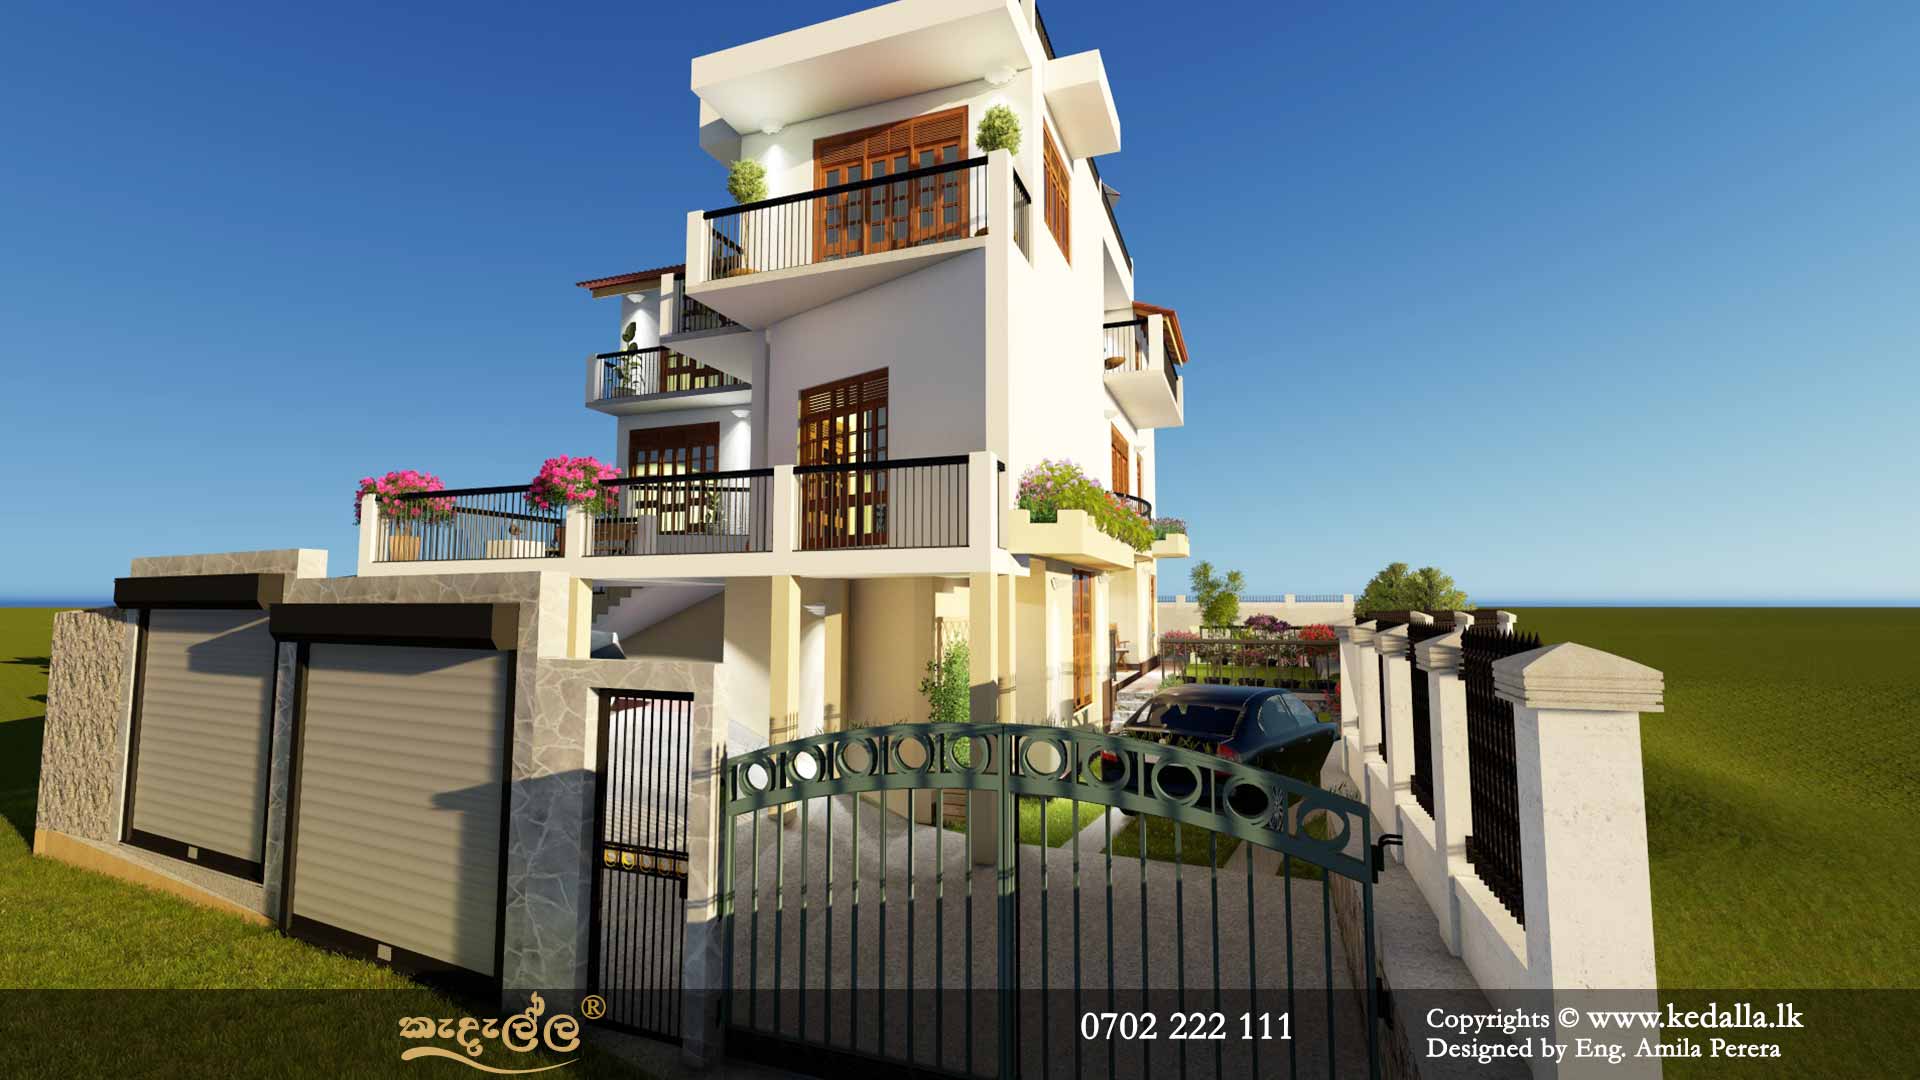 Elevated house plans designers in sri lanka provide the most detailed architectural drawings for builders